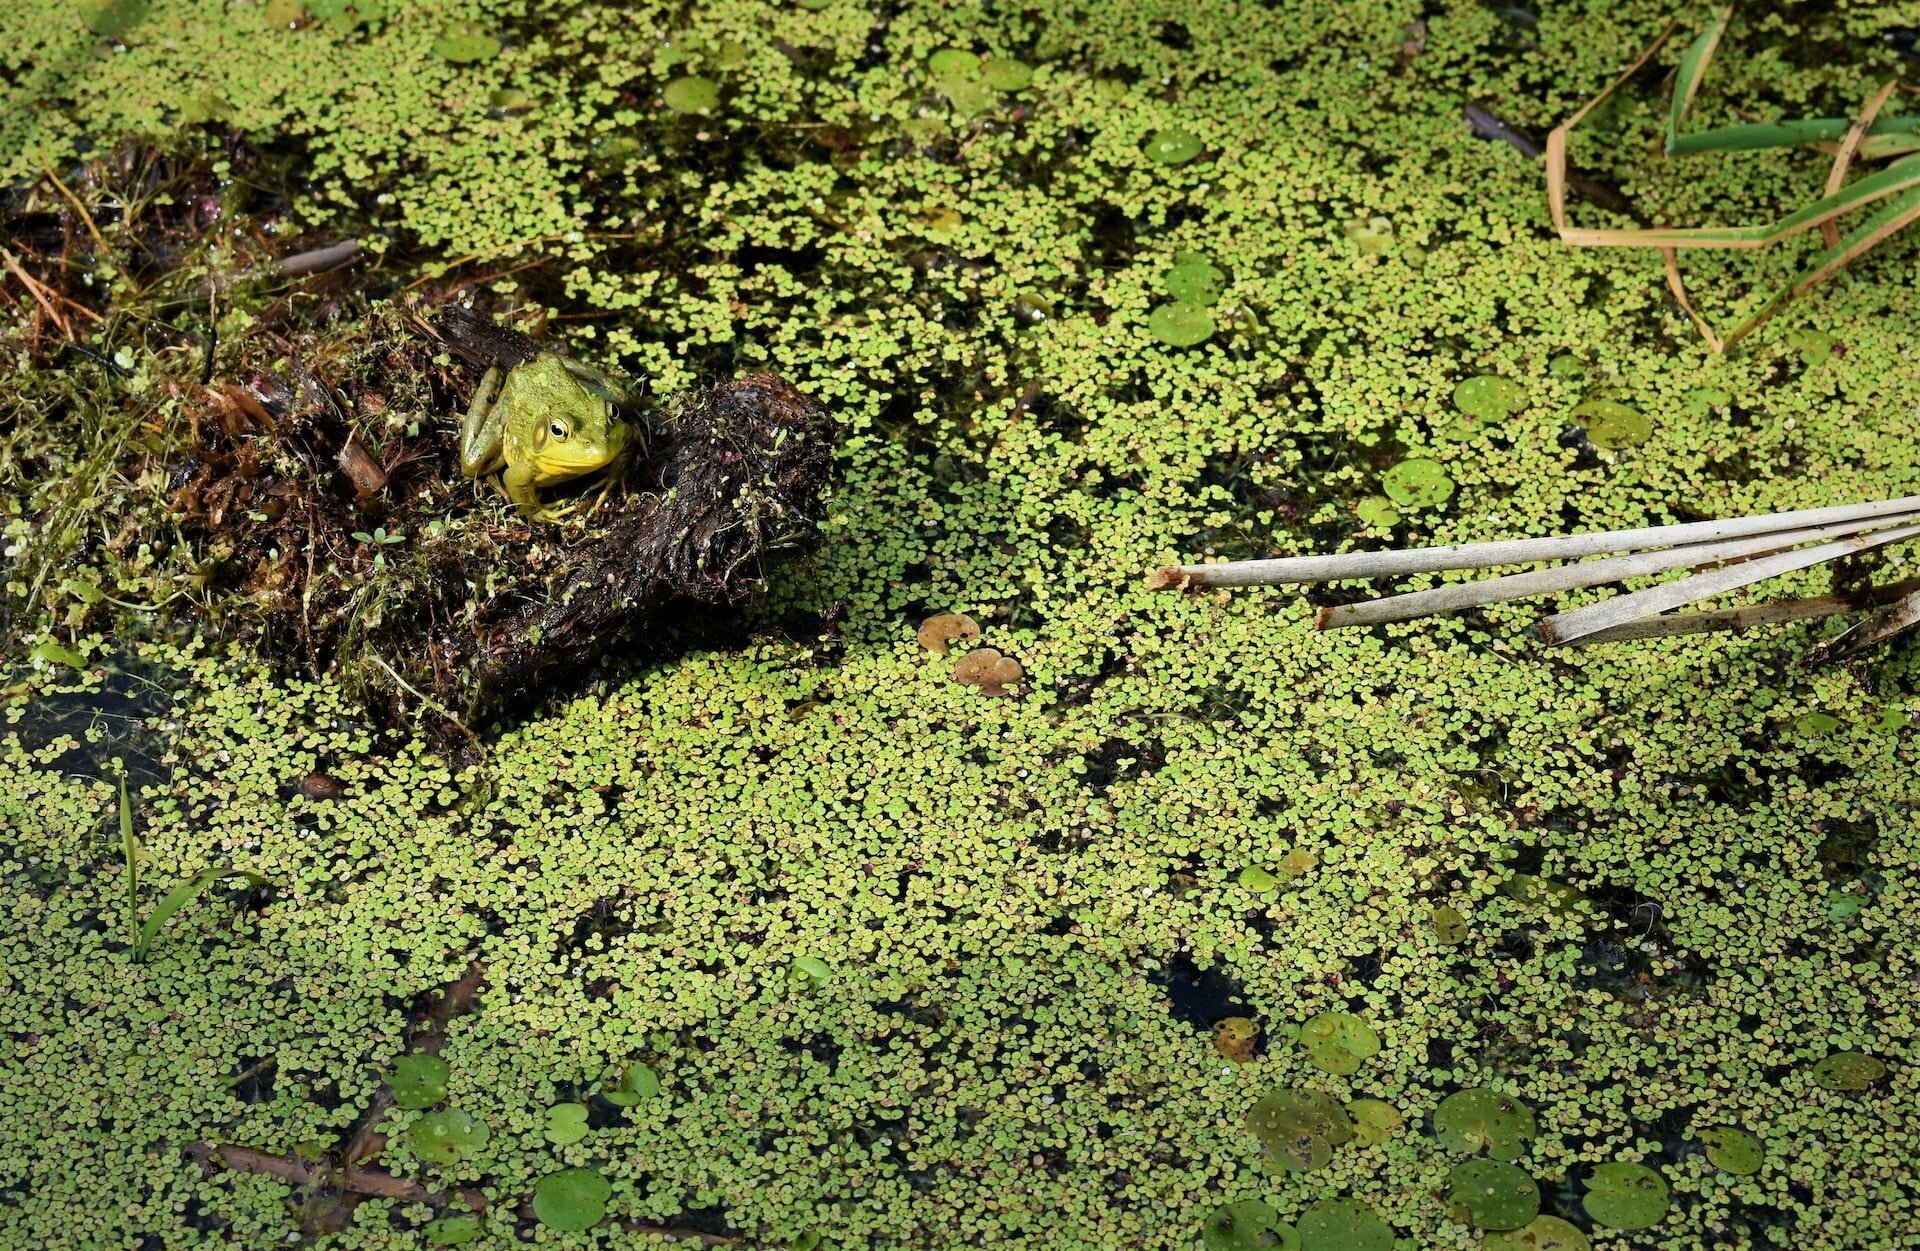 Super-Duckweed to provide Biofuel for Planes, Trains and Heavy Machines.